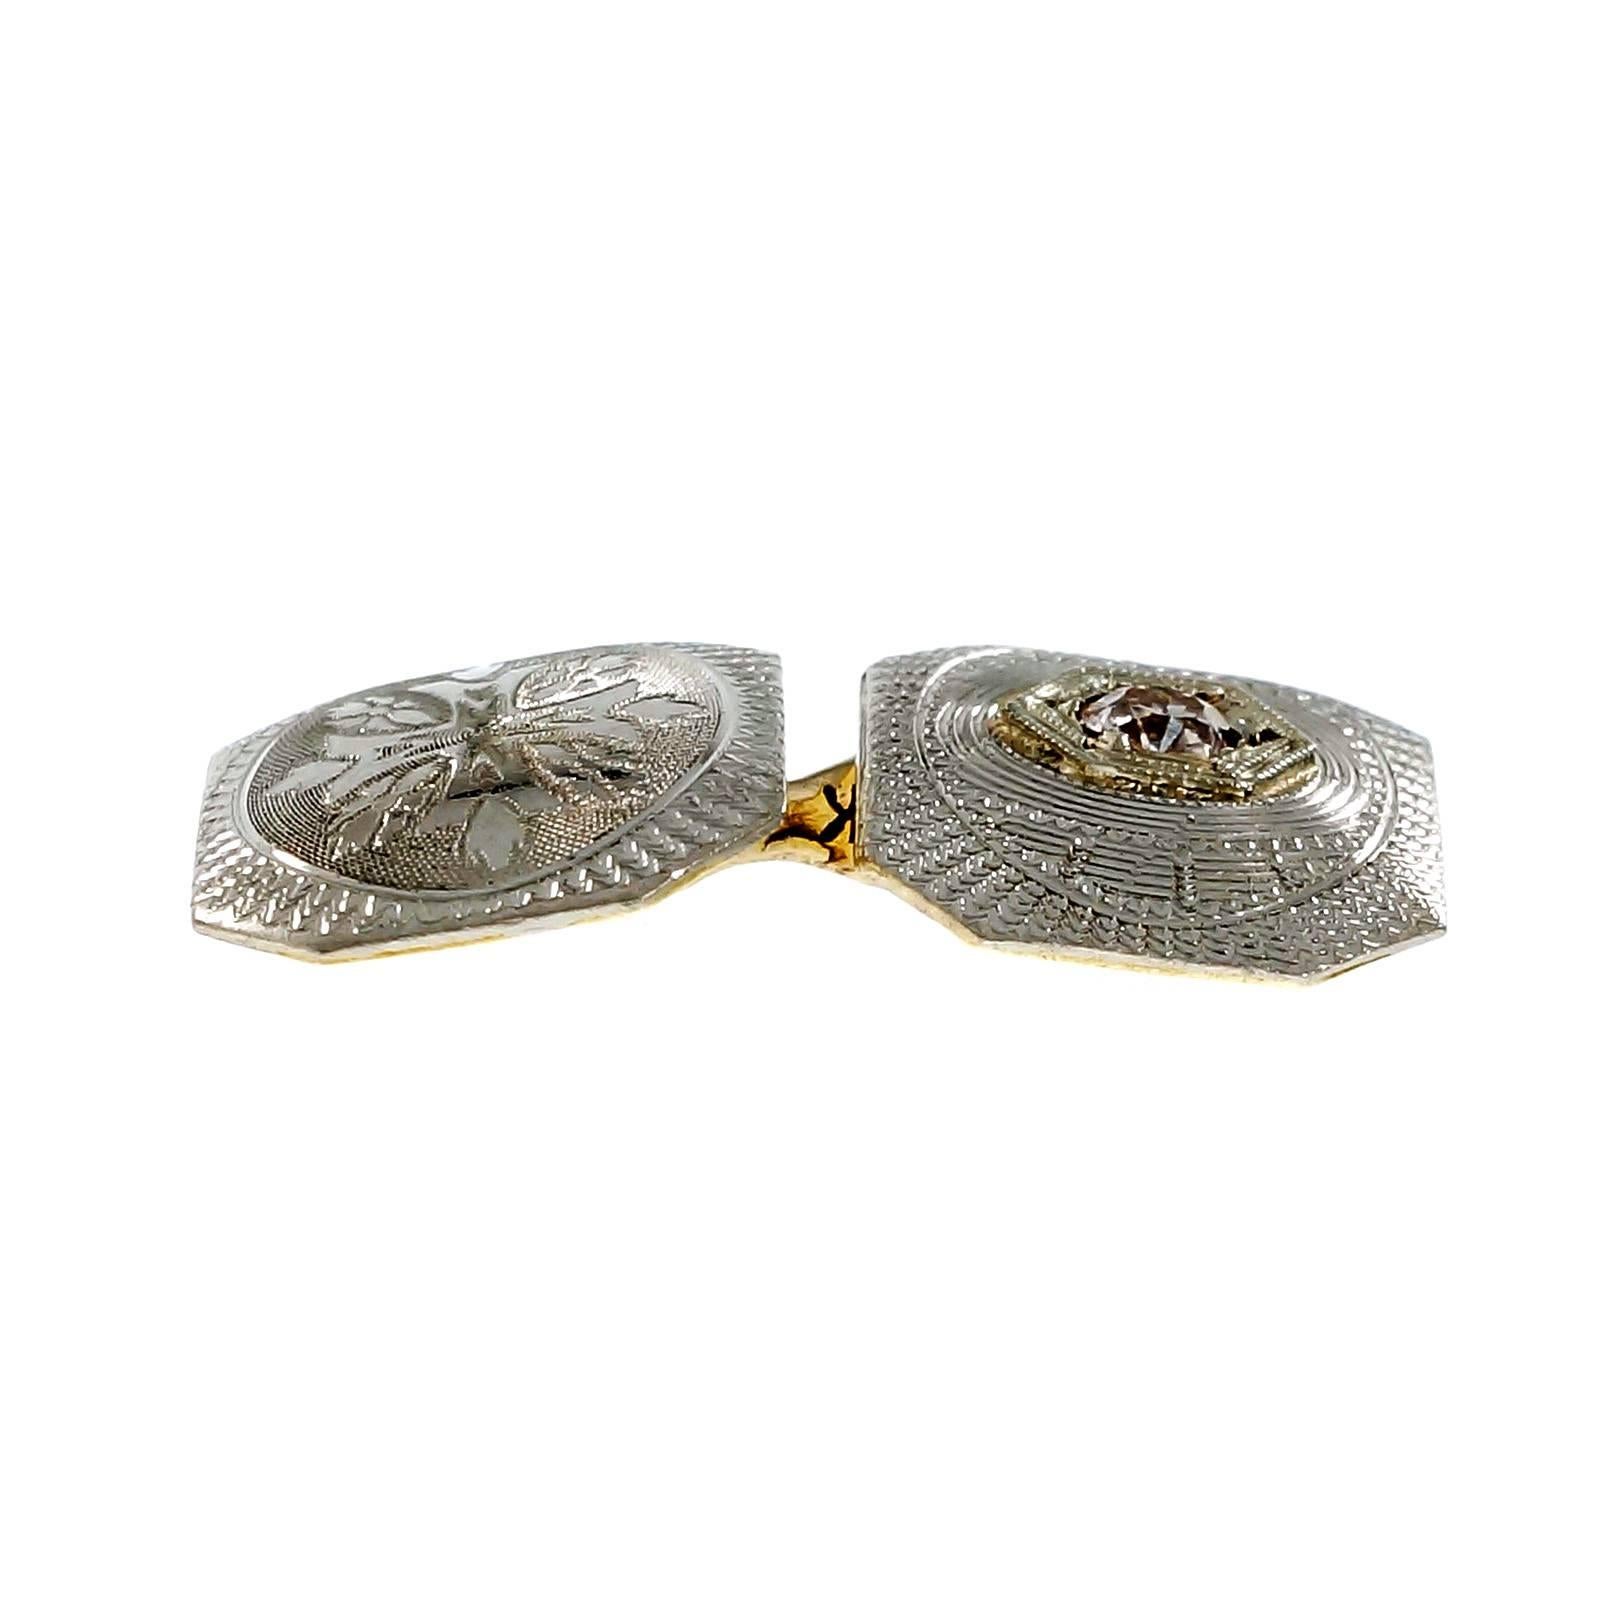 Engraved 1930s Platinum top over 14k gold double sided diamond cufflinks. 

2 round European cut diamonds, approx. total weight .20cts, H, SI1
14k yellow gold and Platinum
Tested: 14k & Platinum
Stamped: Plat top 14k back
5.8 grams
Top to bottom: